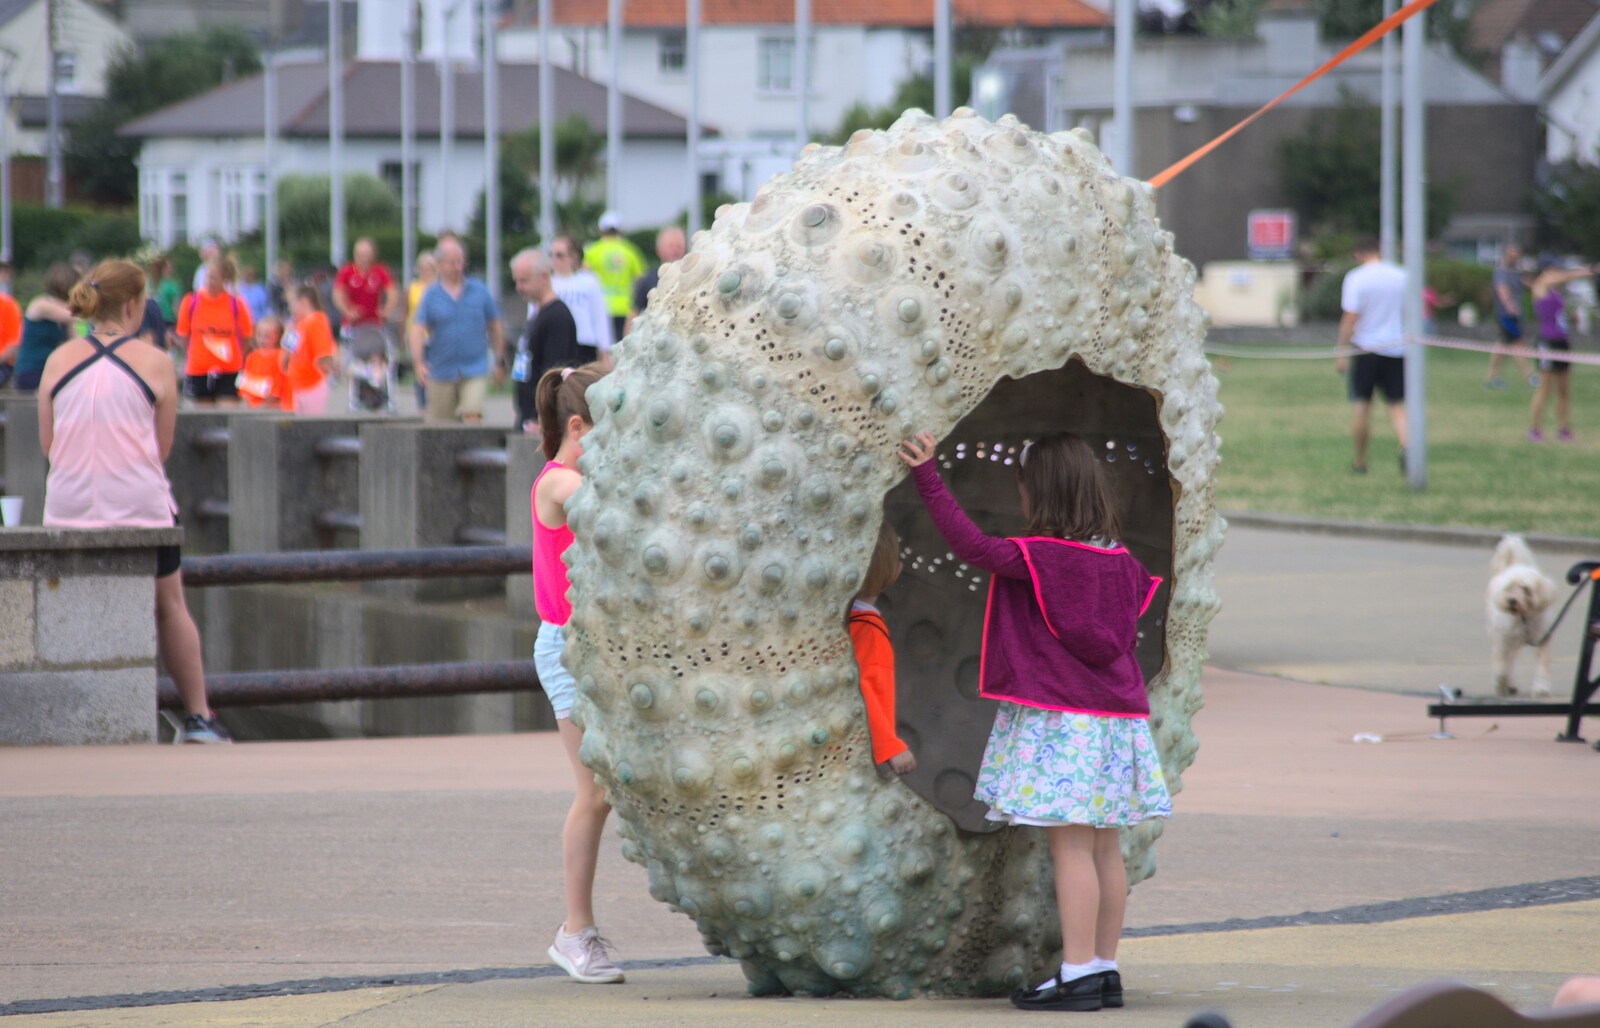 Children play in a giant sea-urchin sculpture from The Dún Laoghaire 10k Run, County Dublin, Ireland - 6th August 2018